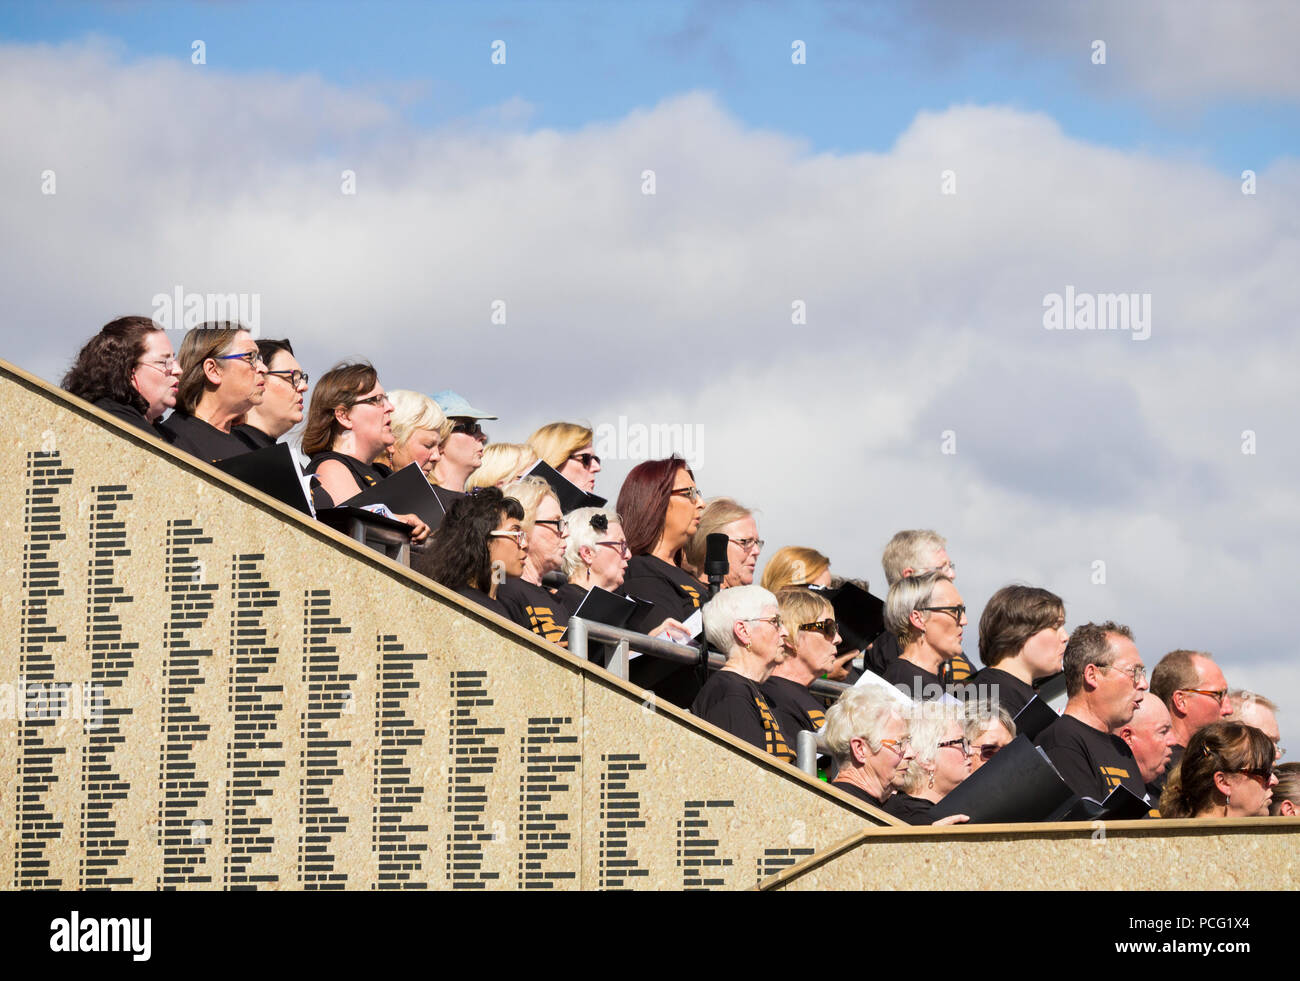 Stockton International Riverside Festival, Stockton on Tees, England. United Kingdom. 2nd August, 2018. Rehearsals for 'This is not for you', a performance paying tribute to Britain`s wounded war veterans, men and woman. The piece is performed by Blesma, (The Limbless Veterans), professional performers and local community choirs. The piece will be performed 3 times during the festival. PICTURED: local community choir in rehearsals on open air stage. The festival runs from 2nd - 5th August Credit: ALAN DAWSON/Alamy Live News Stock Photo